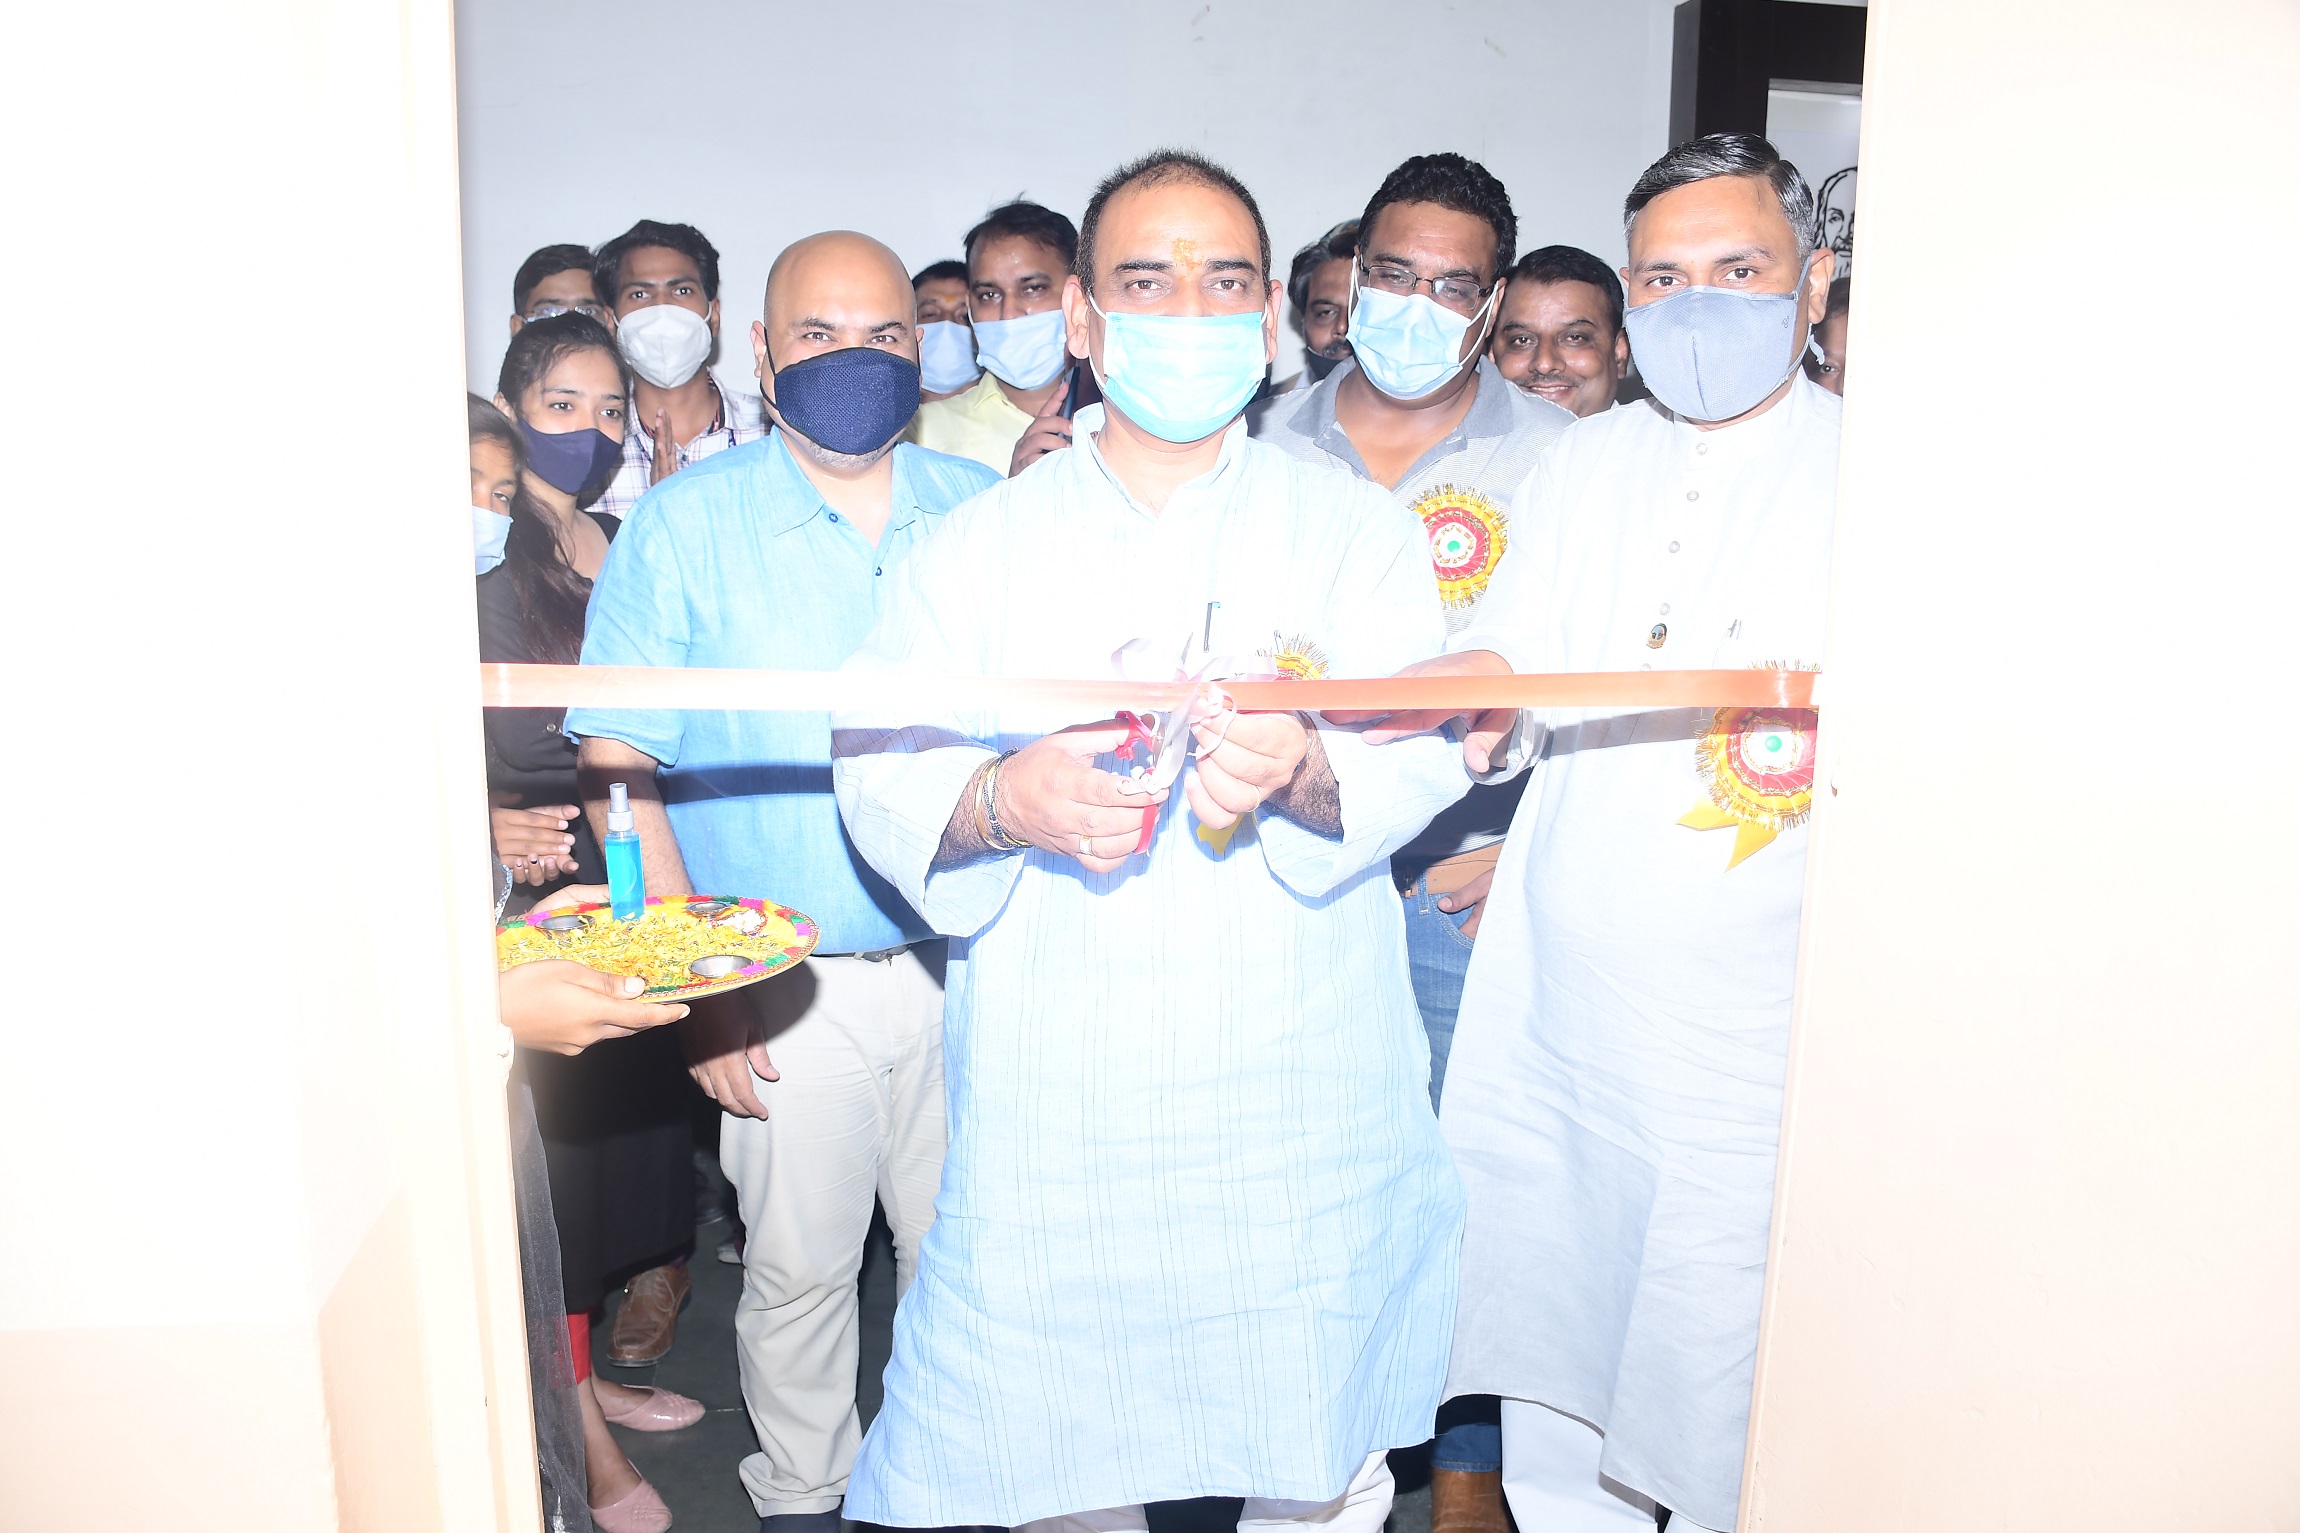 Inauguration by cutting the ribbon